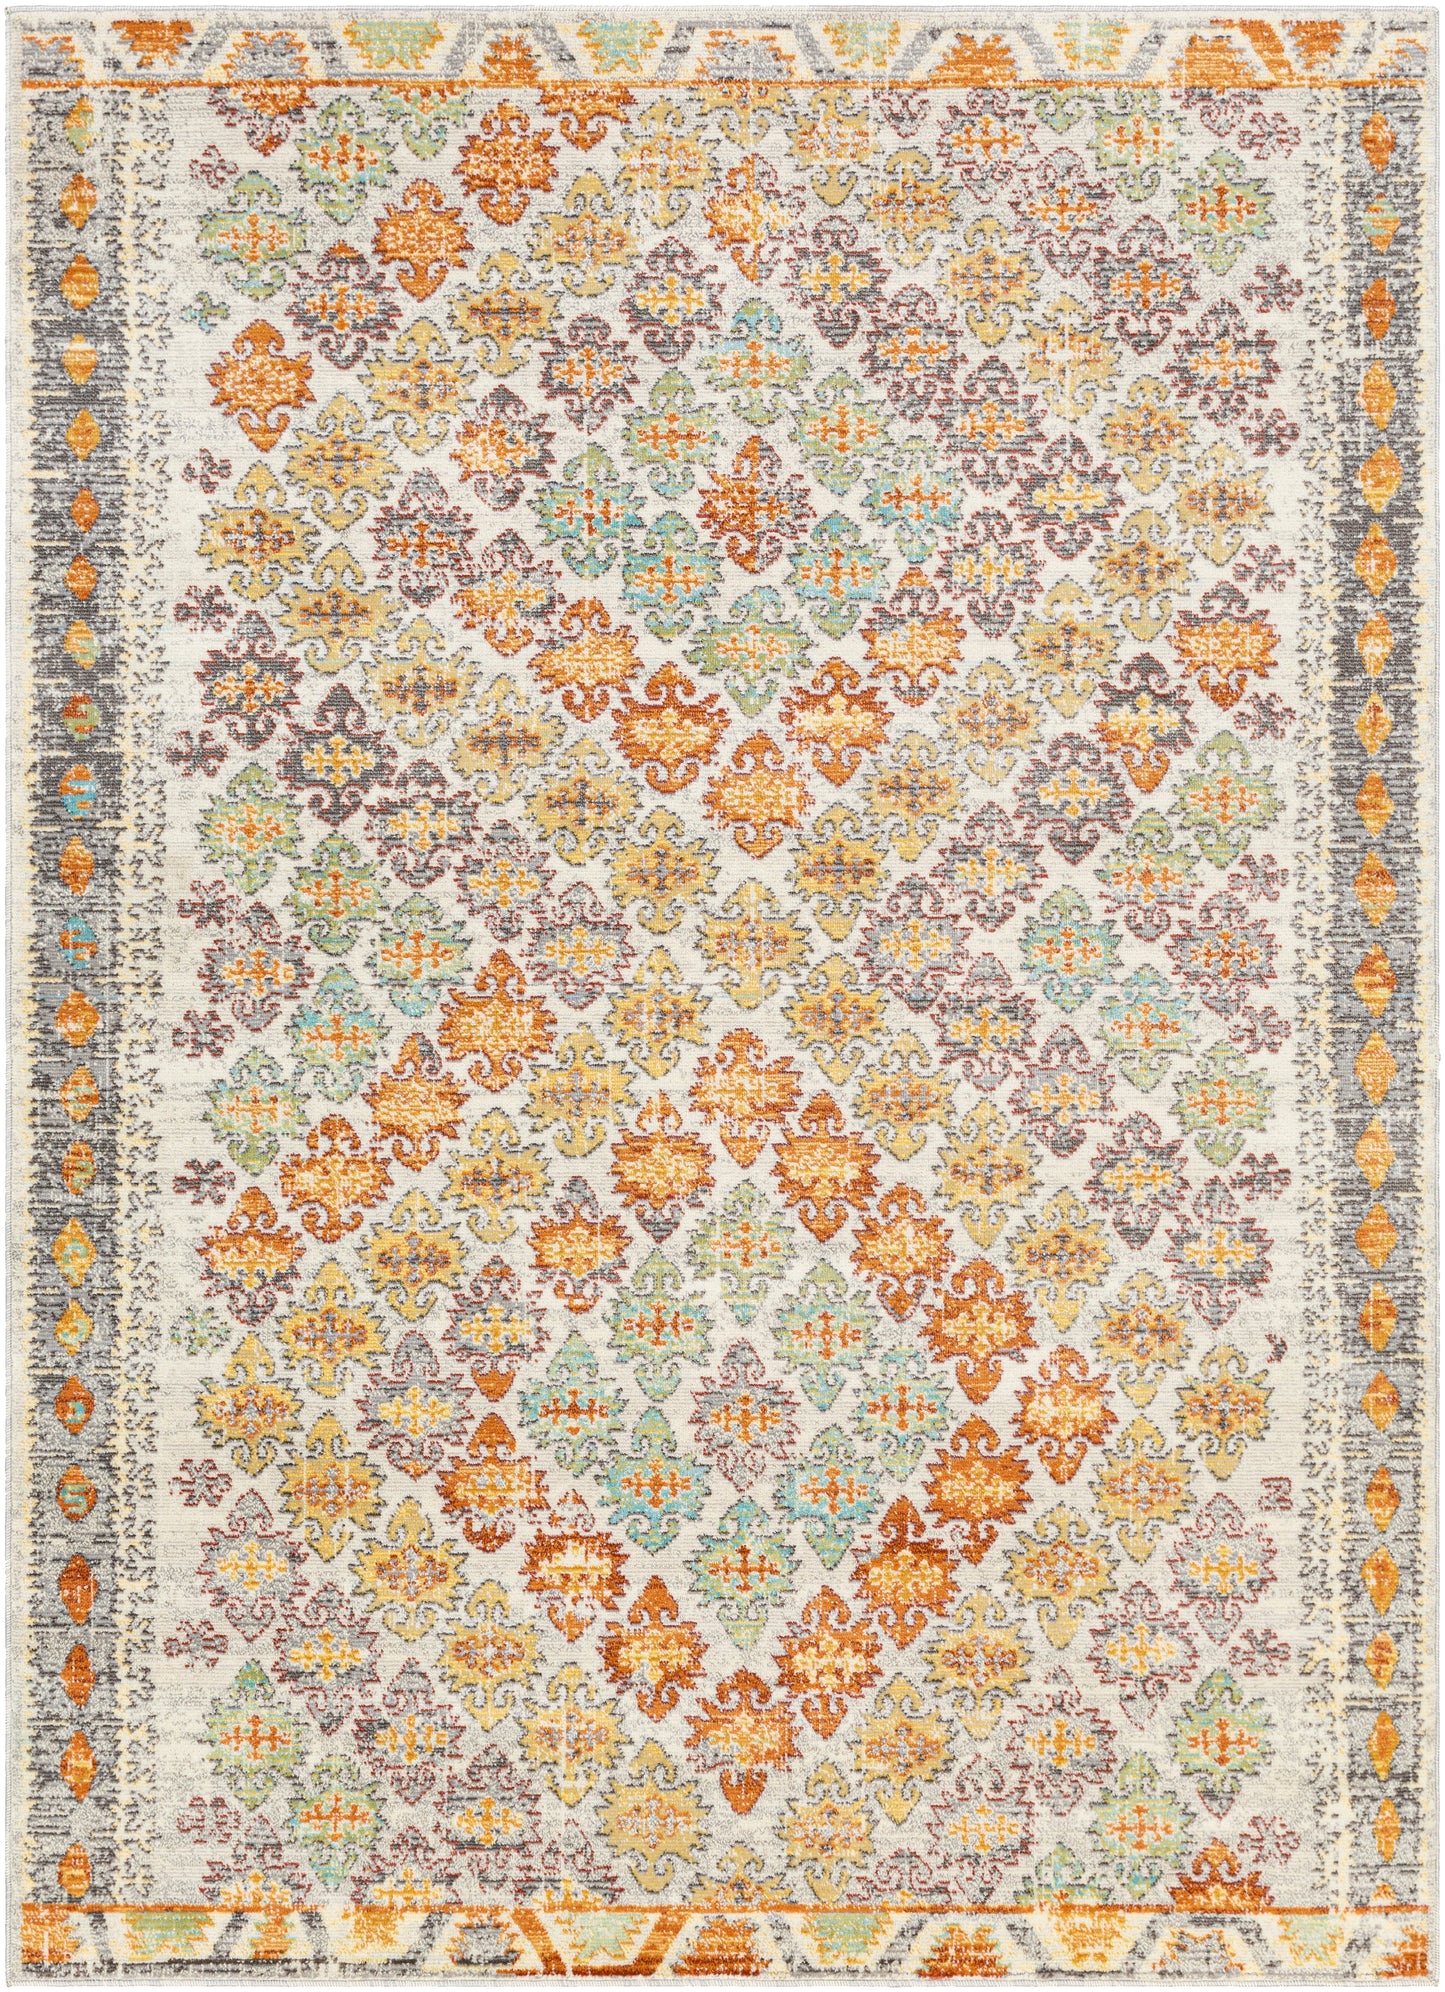 Bodrum 25673 Machine Woven Synthetic Blend Indoor/Outdoor Area Rug by Surya Rugs